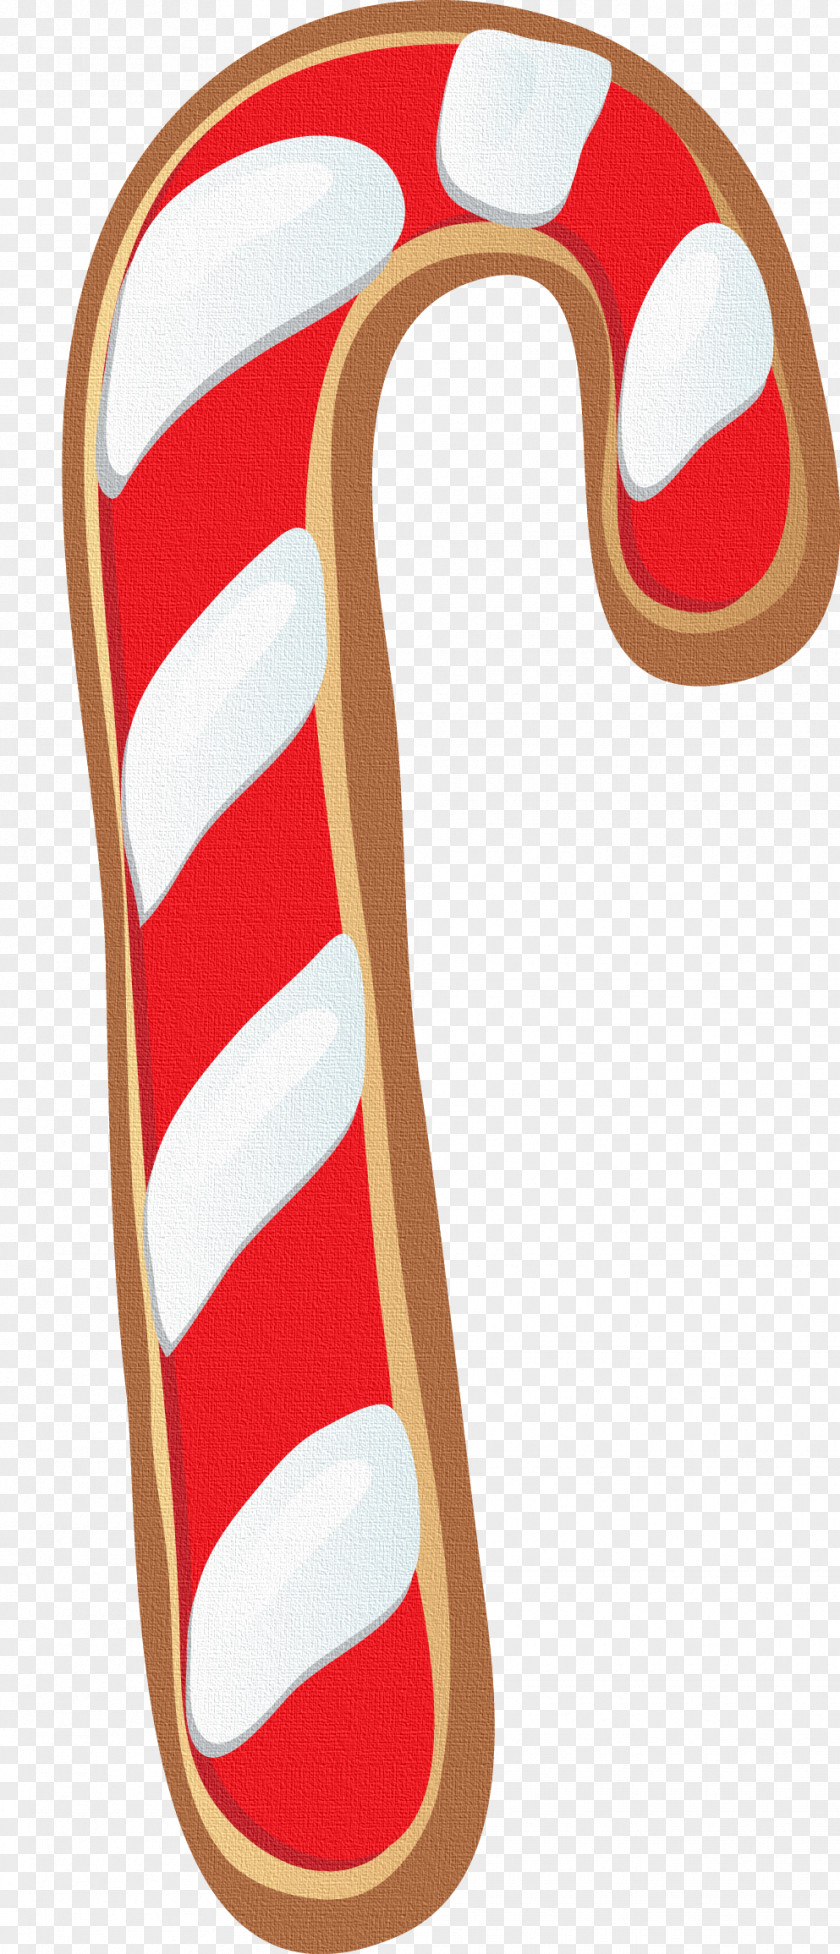 Cane Candy Santa Claus Christmas Tree Clip Art PNG